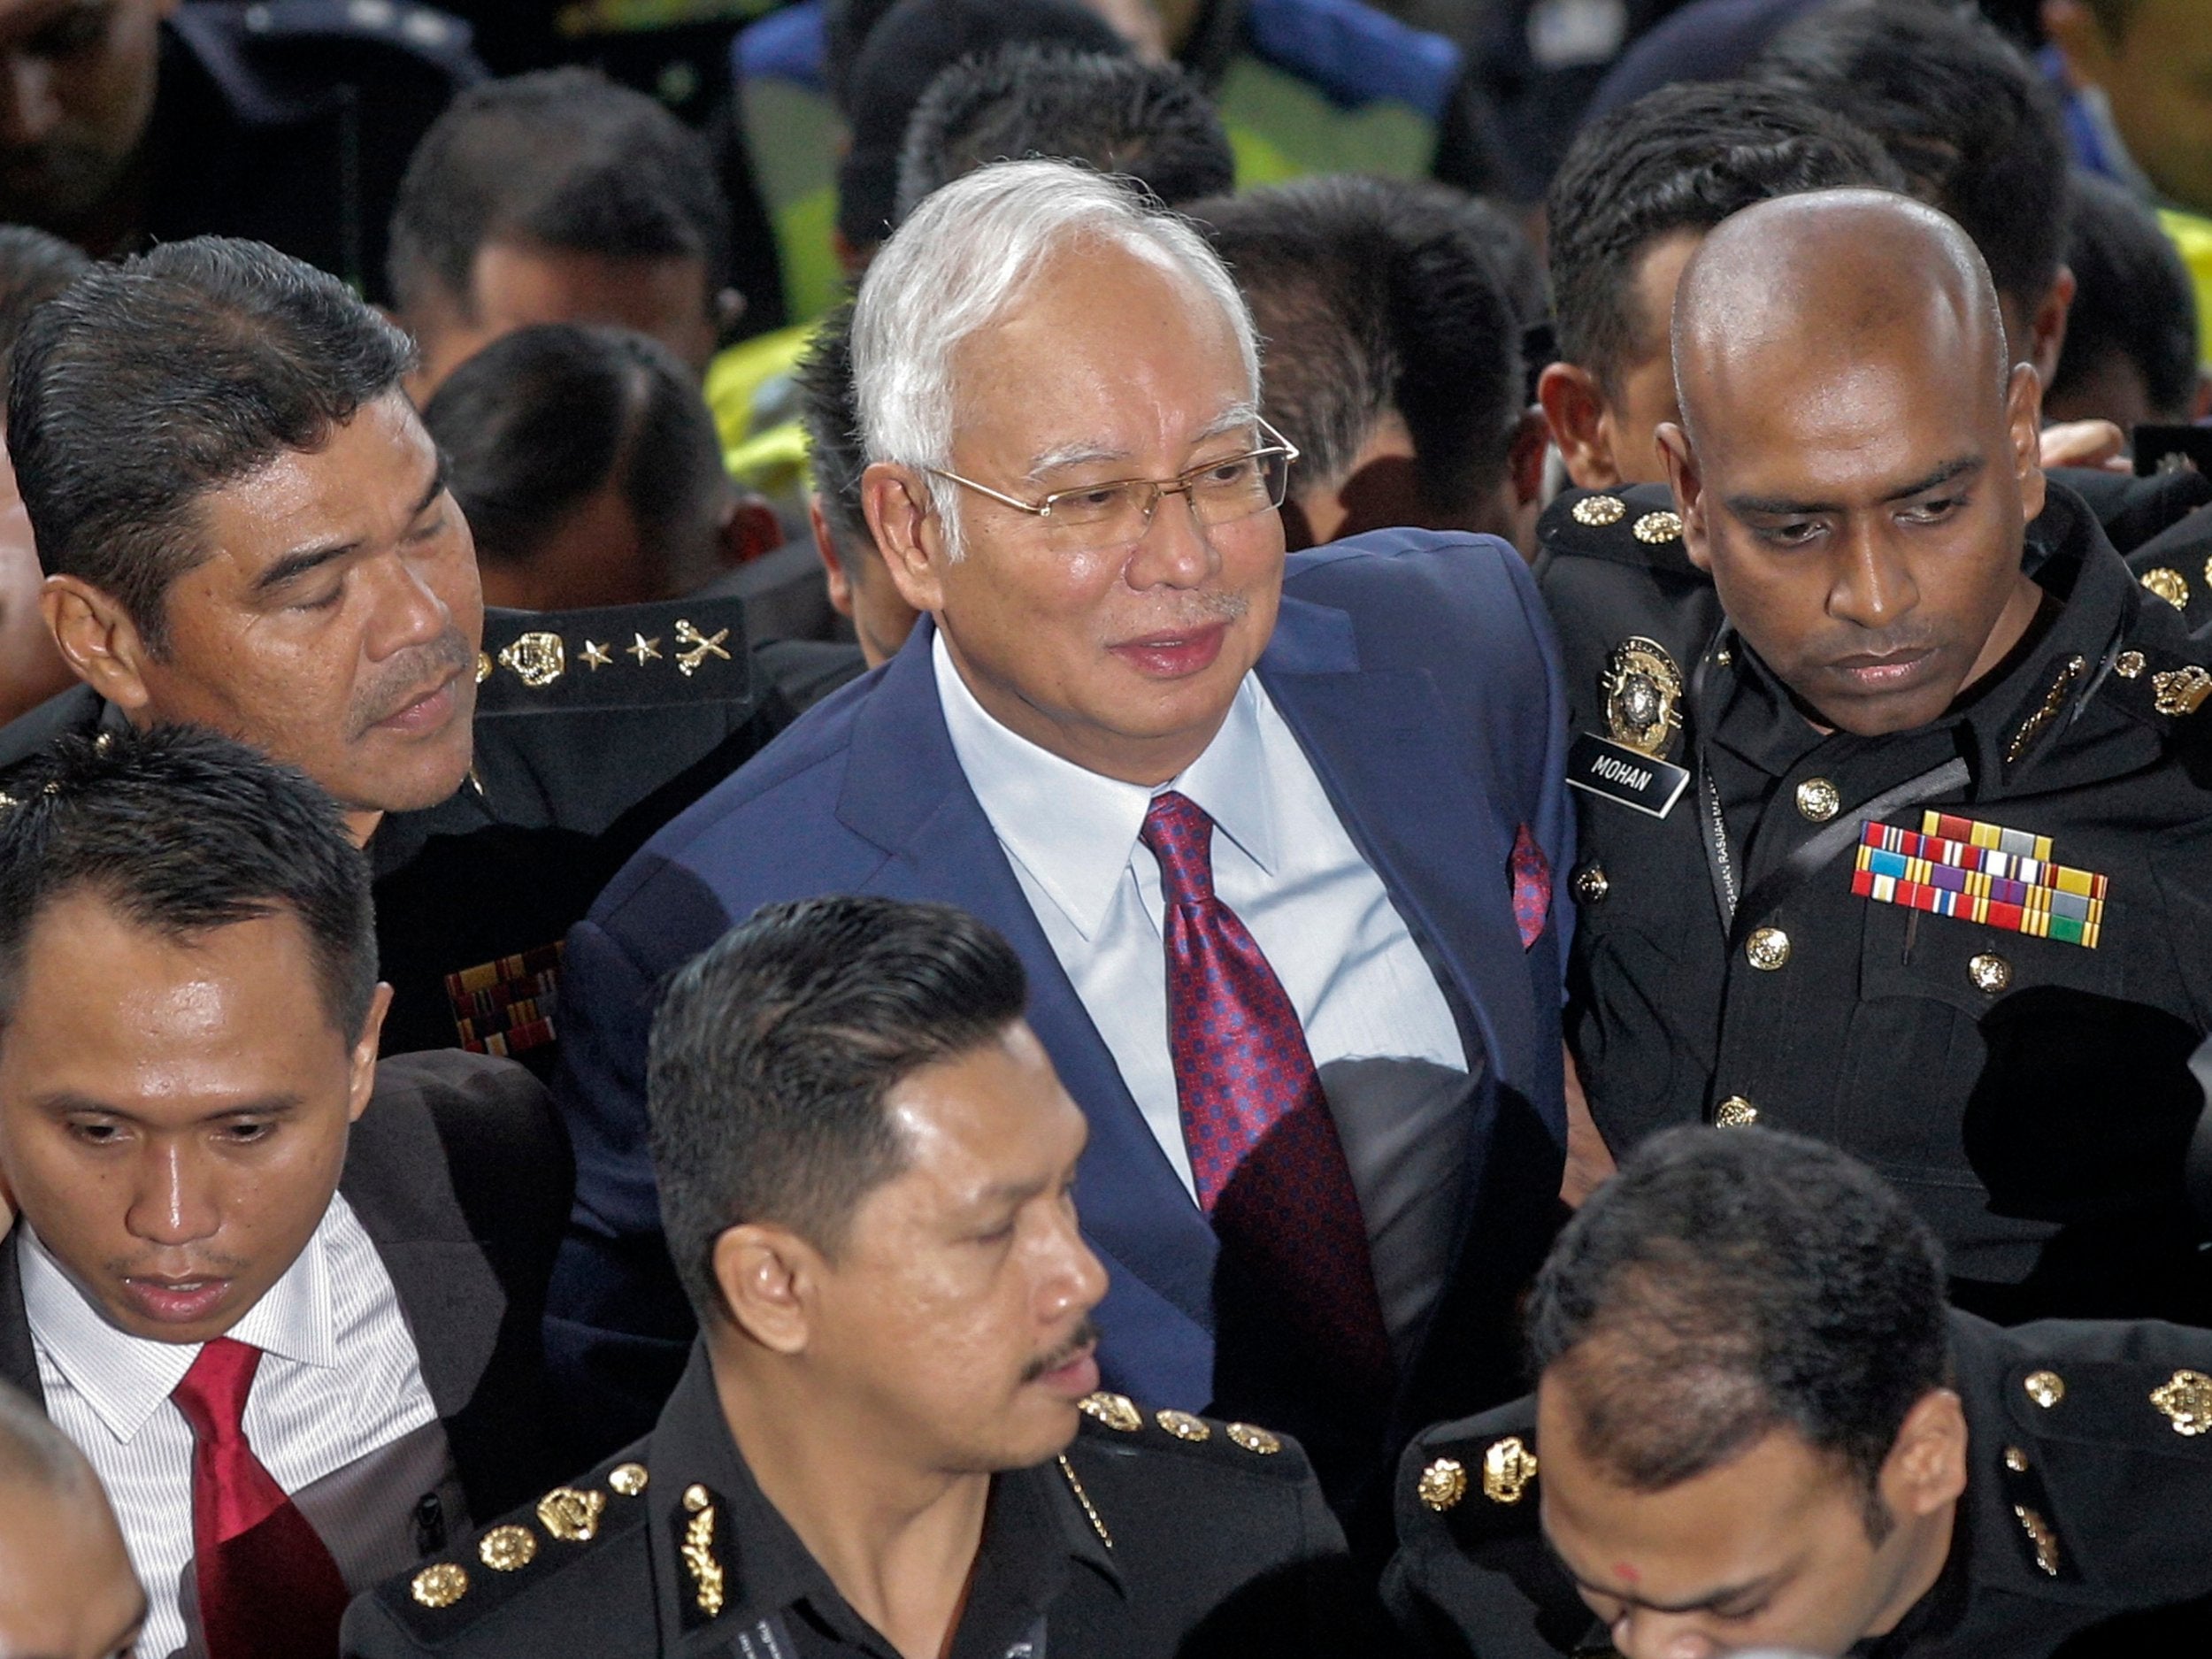 Former Malaysian prime minister Najib Razak is surrounded by police as he arrives at Kuala Lumpur High Court